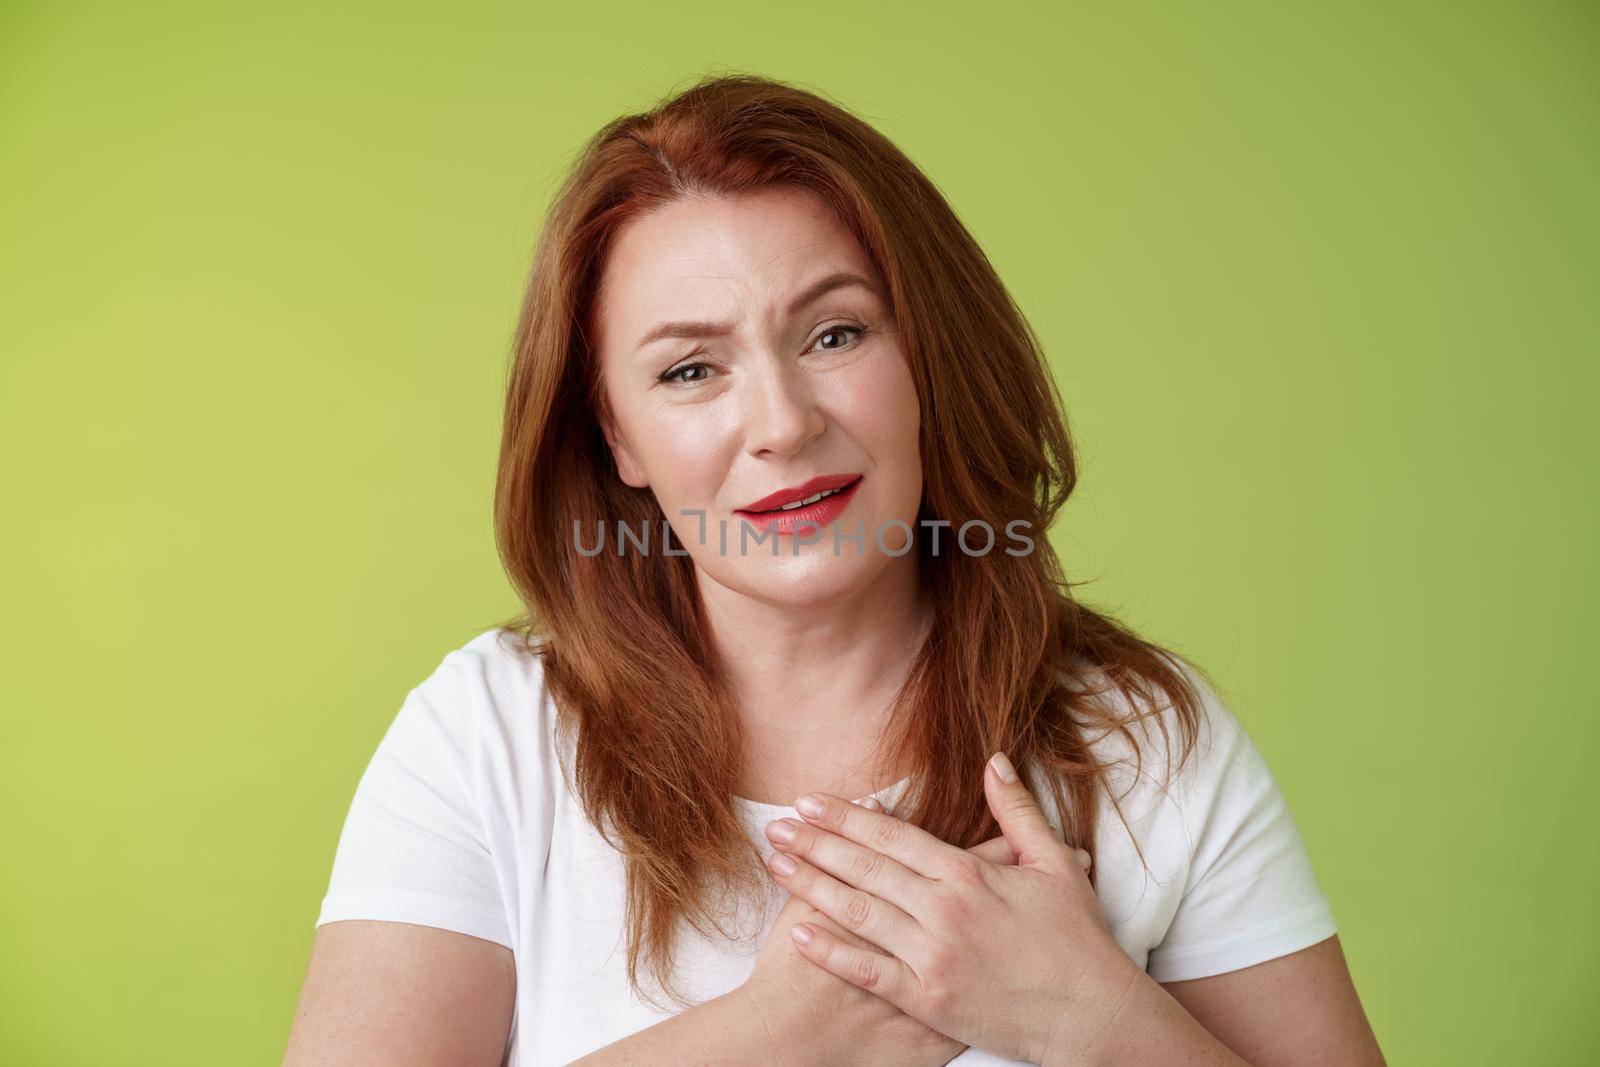 Story touched lady heart. Tender impressed middle-aged redhead woman press palms chest sighing happily look heartwarming temptation smiling appreciate nice gesture grateful thanking dearly.